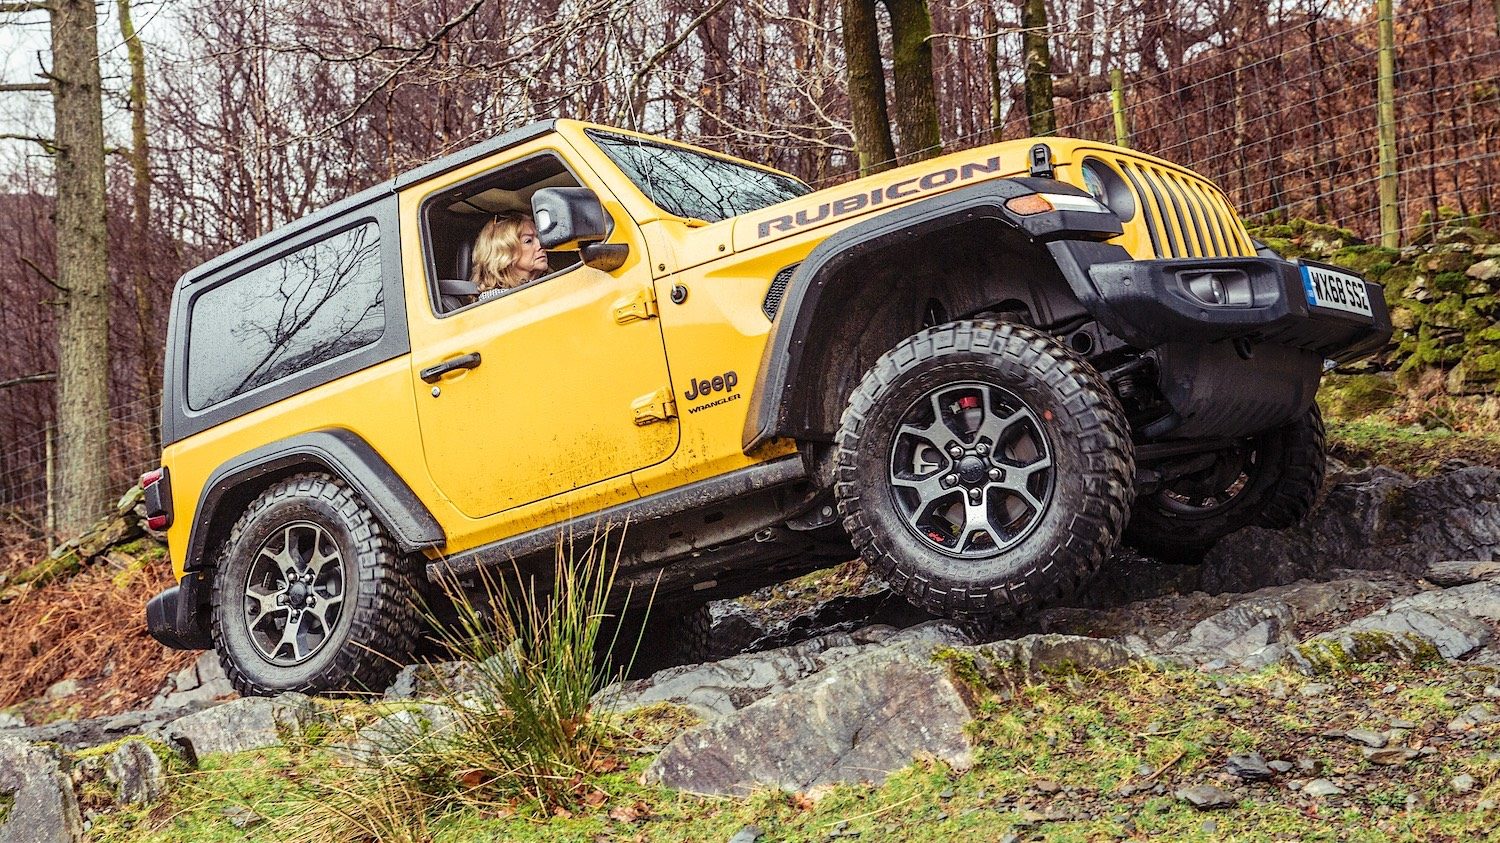  | Reviewed | The awesome 2019 New Jeep Wrangler Rubicon